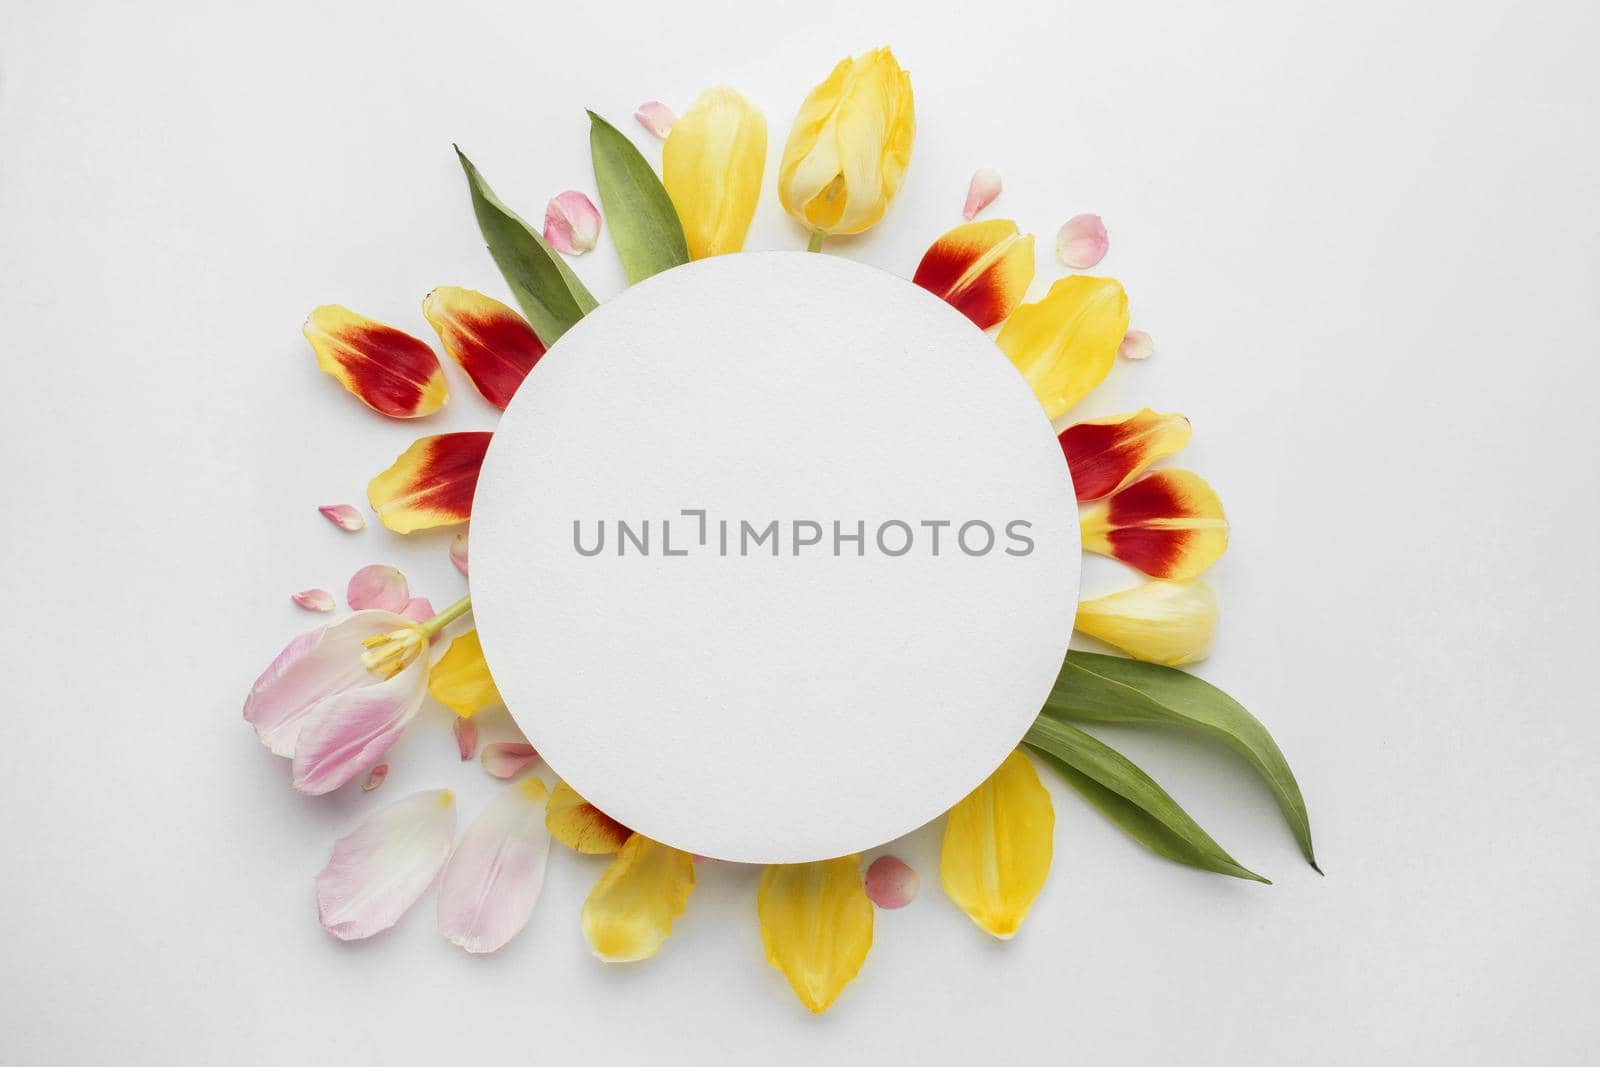 wreath made flower petals. High quality beautiful photo concept by Zahard